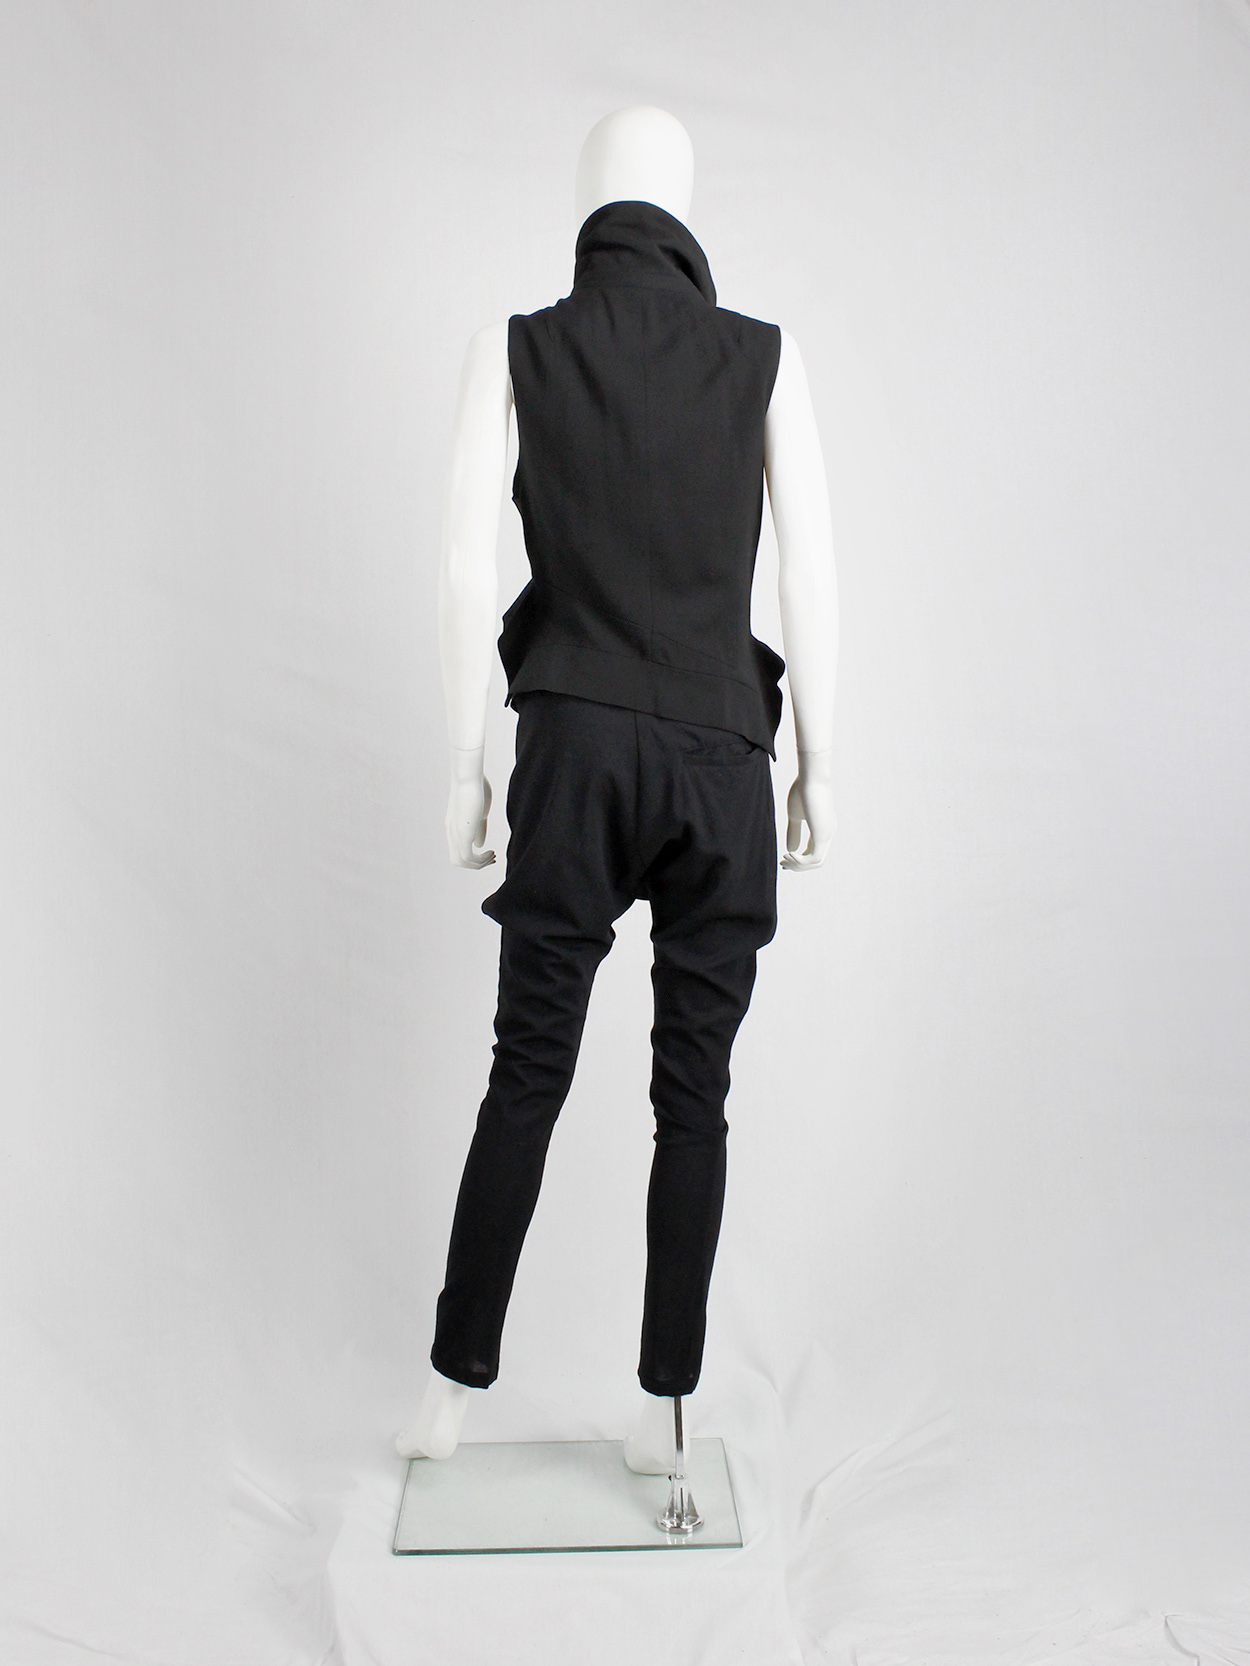 Ann Demeulemeester black draped vest with standing collar and zipper panels fall 2012 (18)